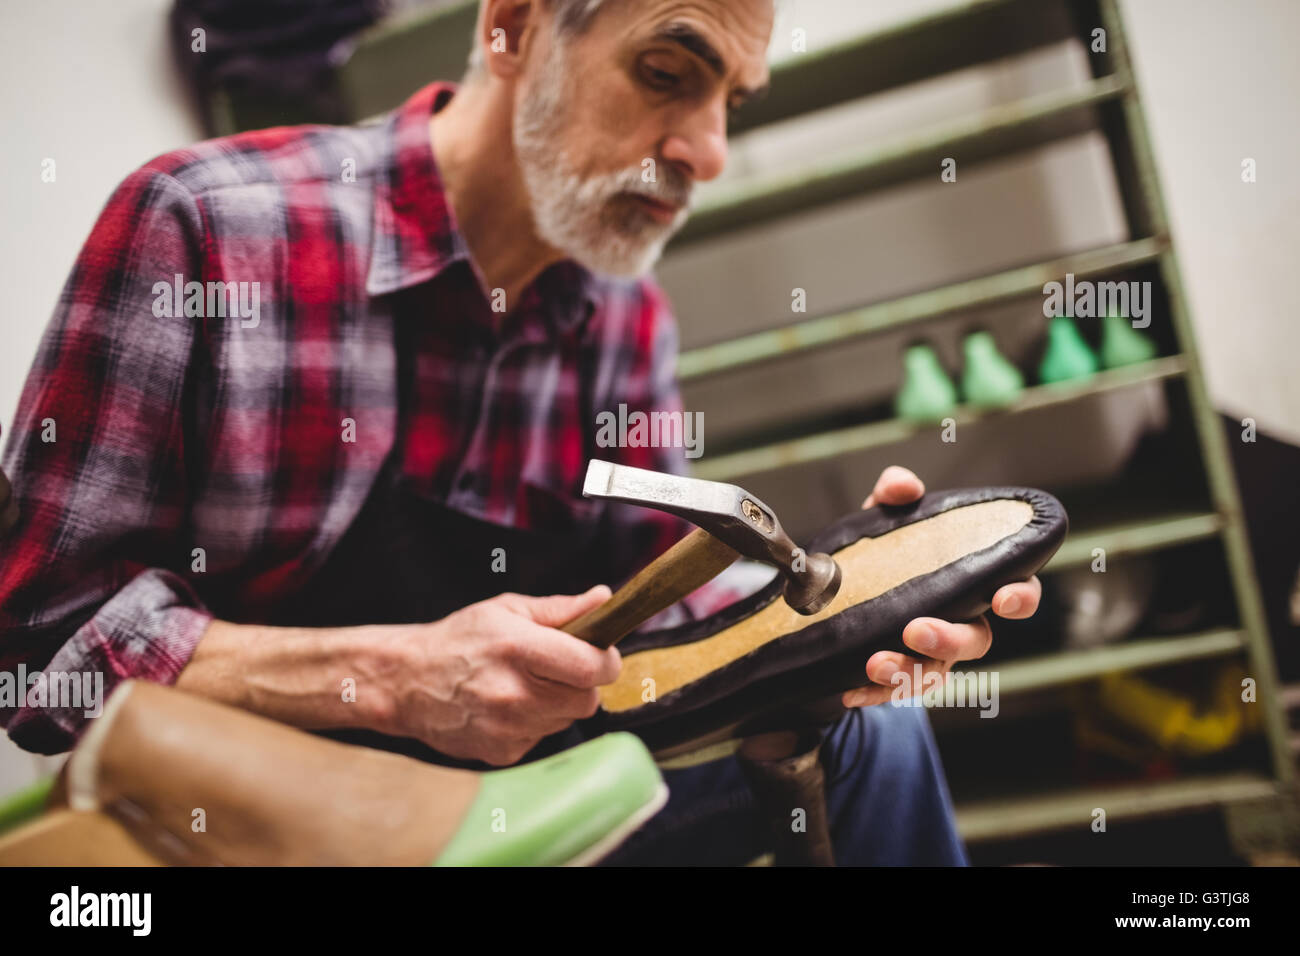 Cobbler hammering on the sole of a shoe Stock Photo